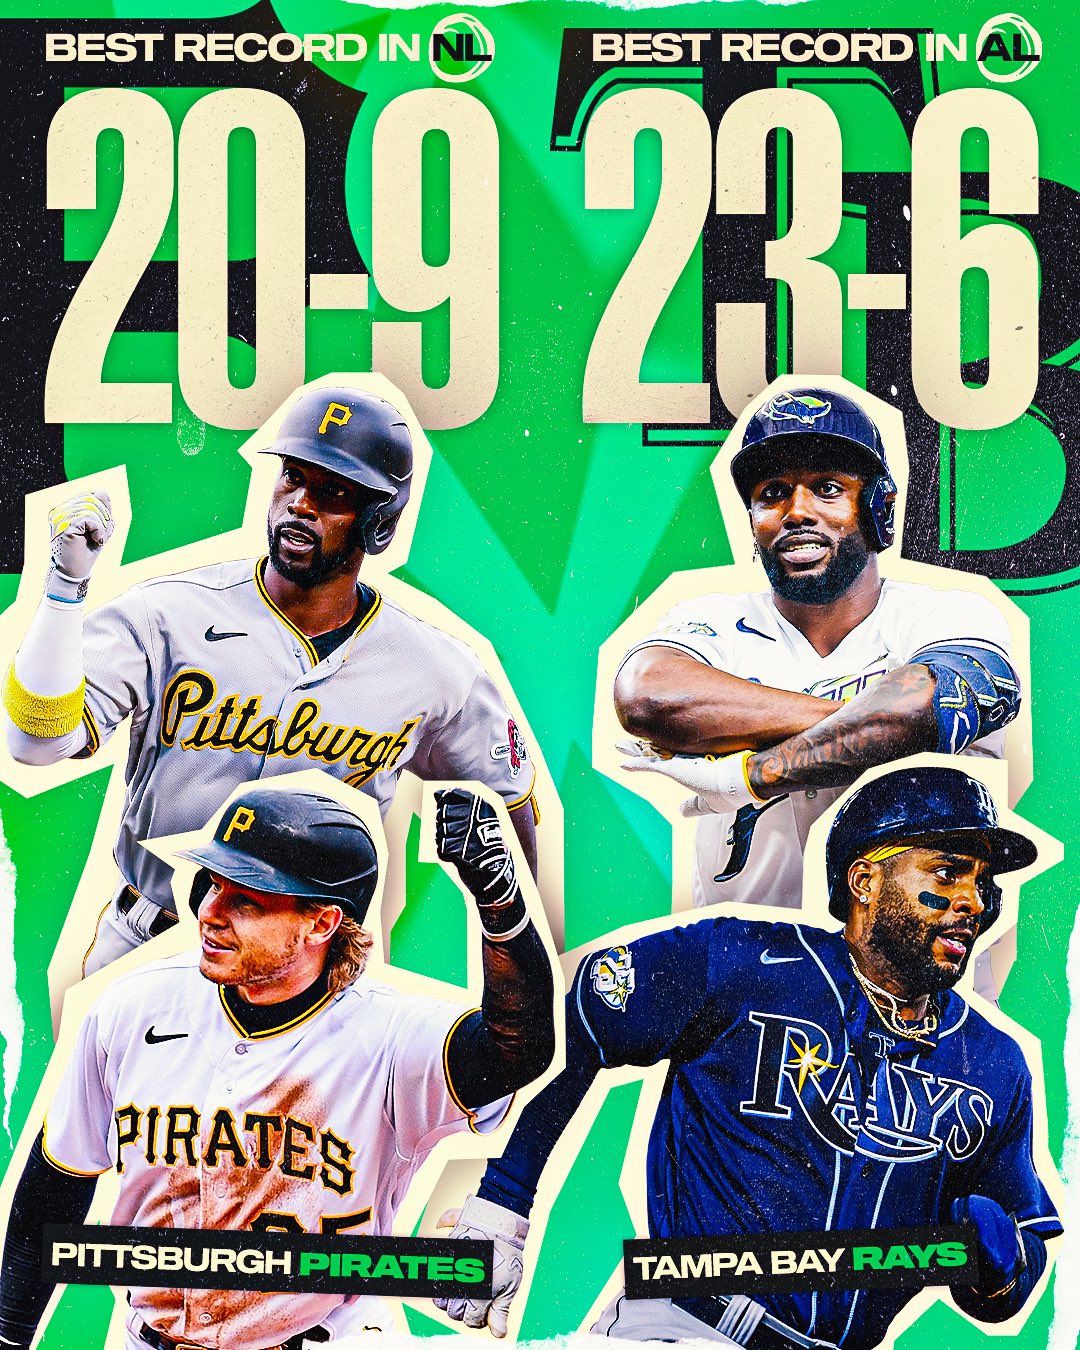 MLB on X: The teams with the best records in baseball square off